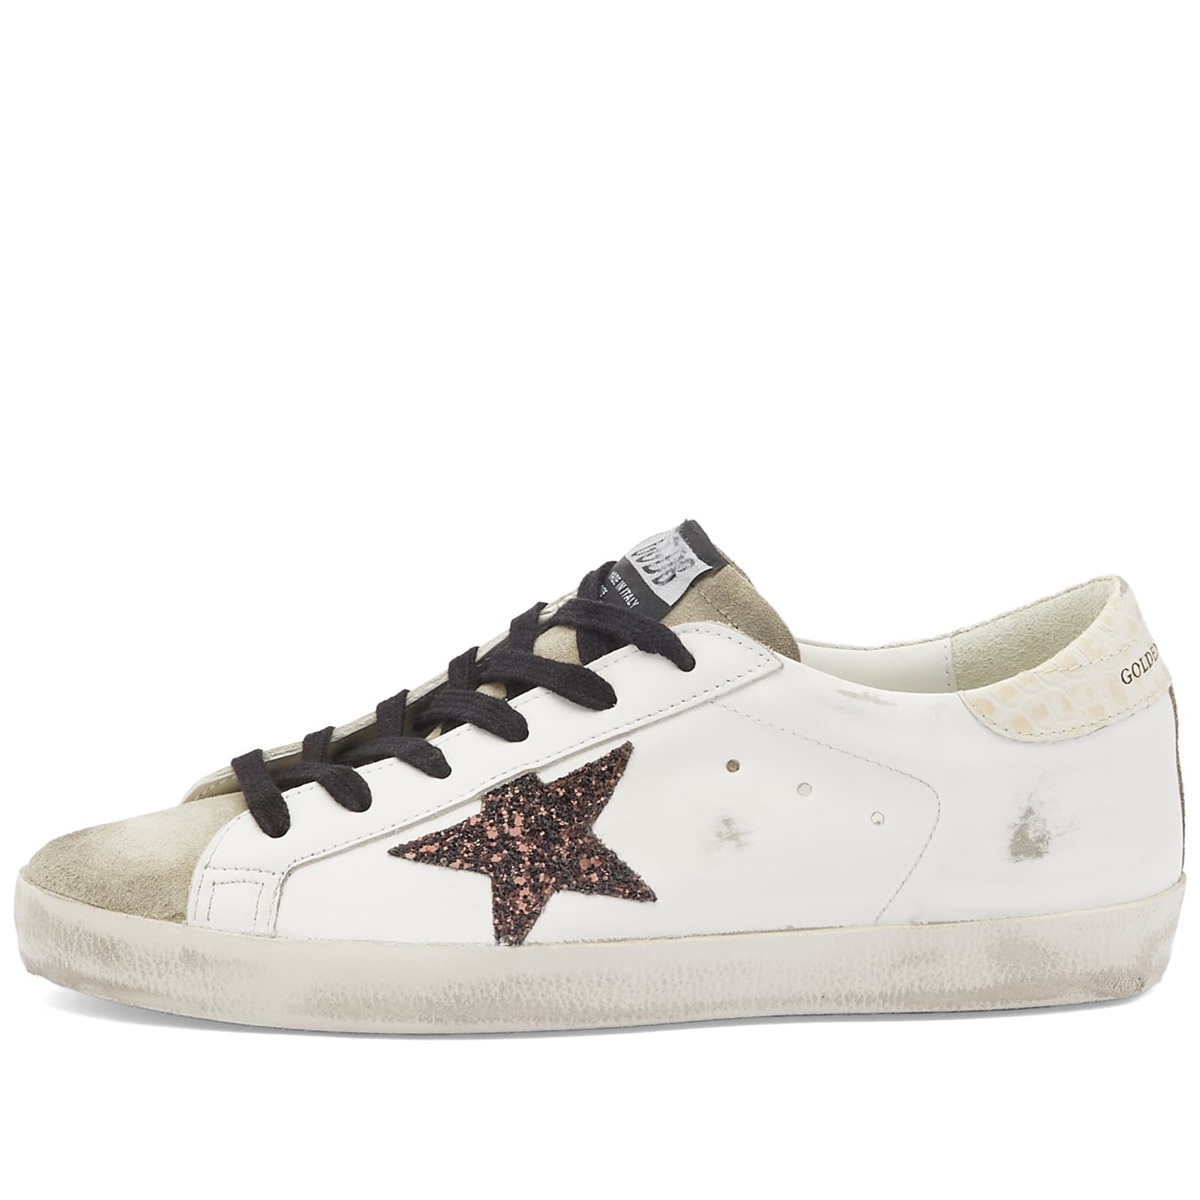 Golden Goose Women's Super Star Leather Sneakers in White/Taupe/Coffee ...